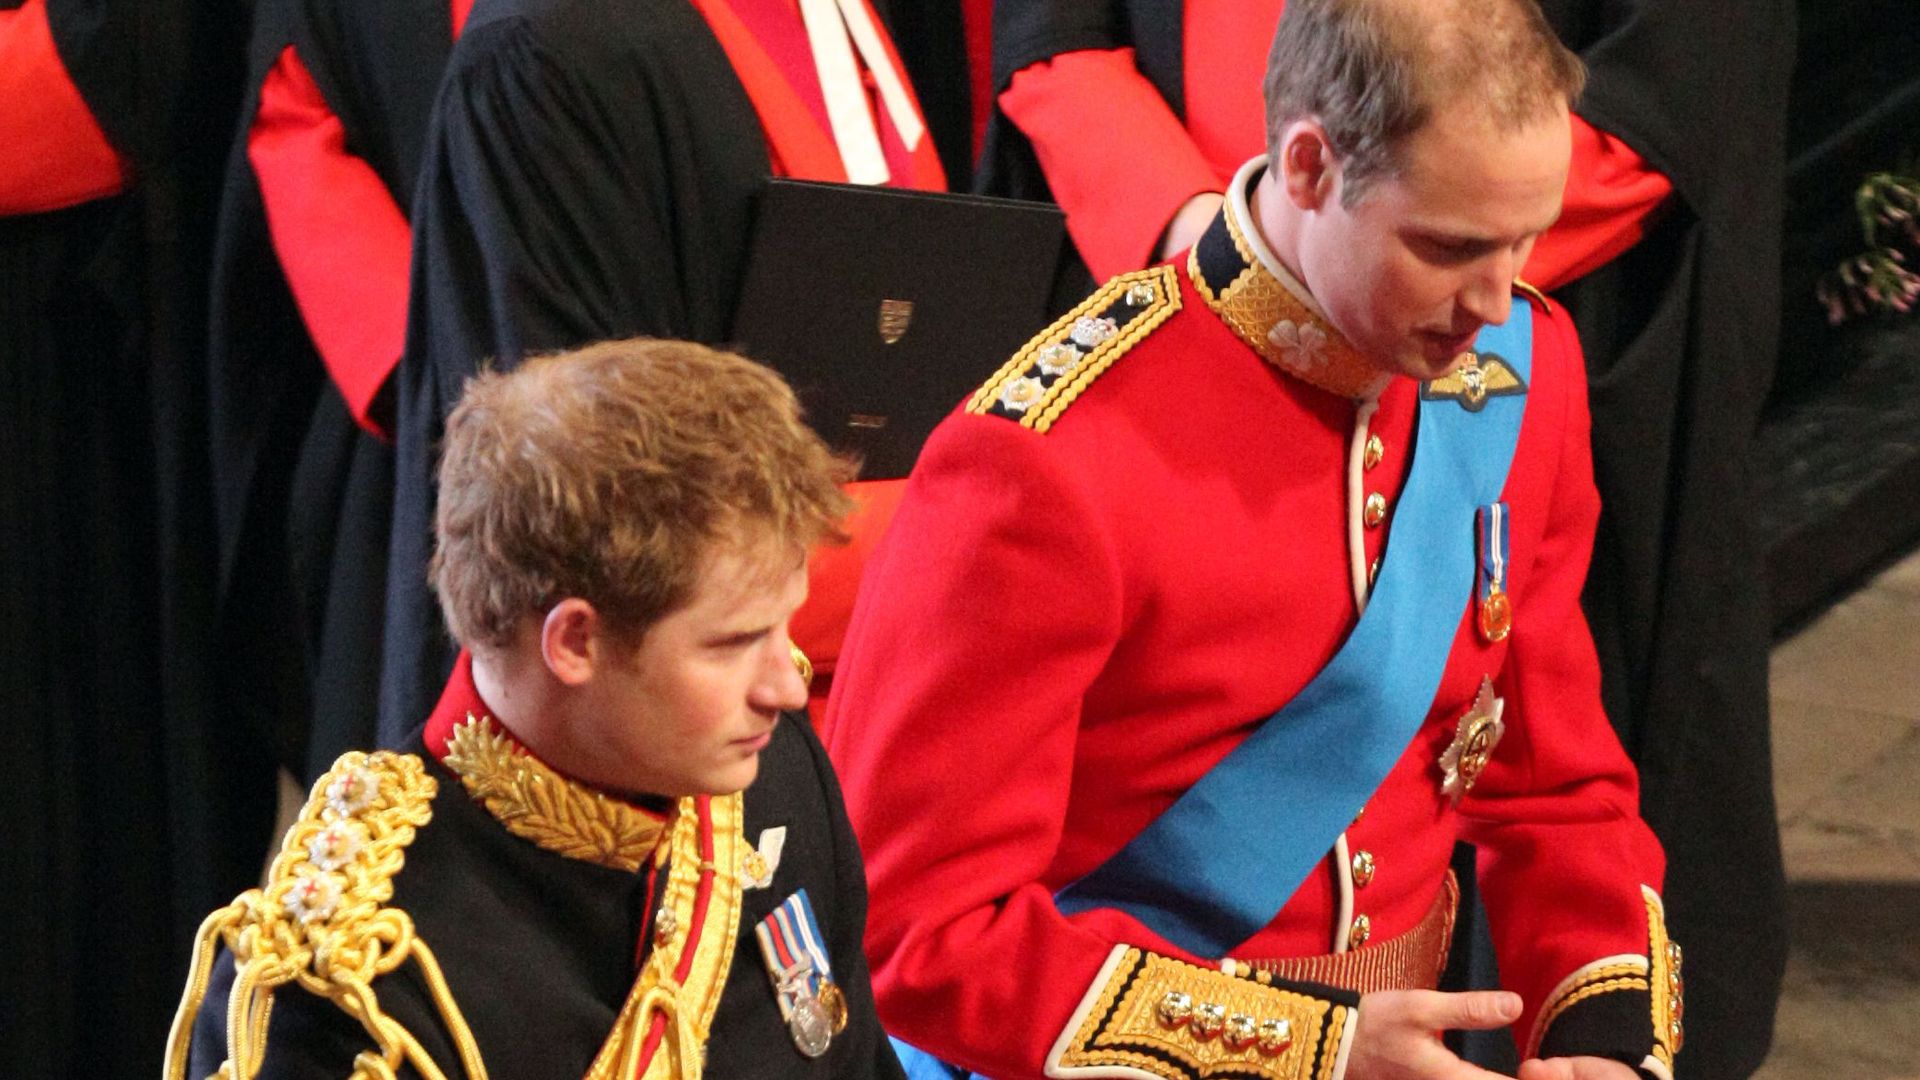 Palace feared Prince William and groomsman Prince Harry would 'pass out' at royal wedding